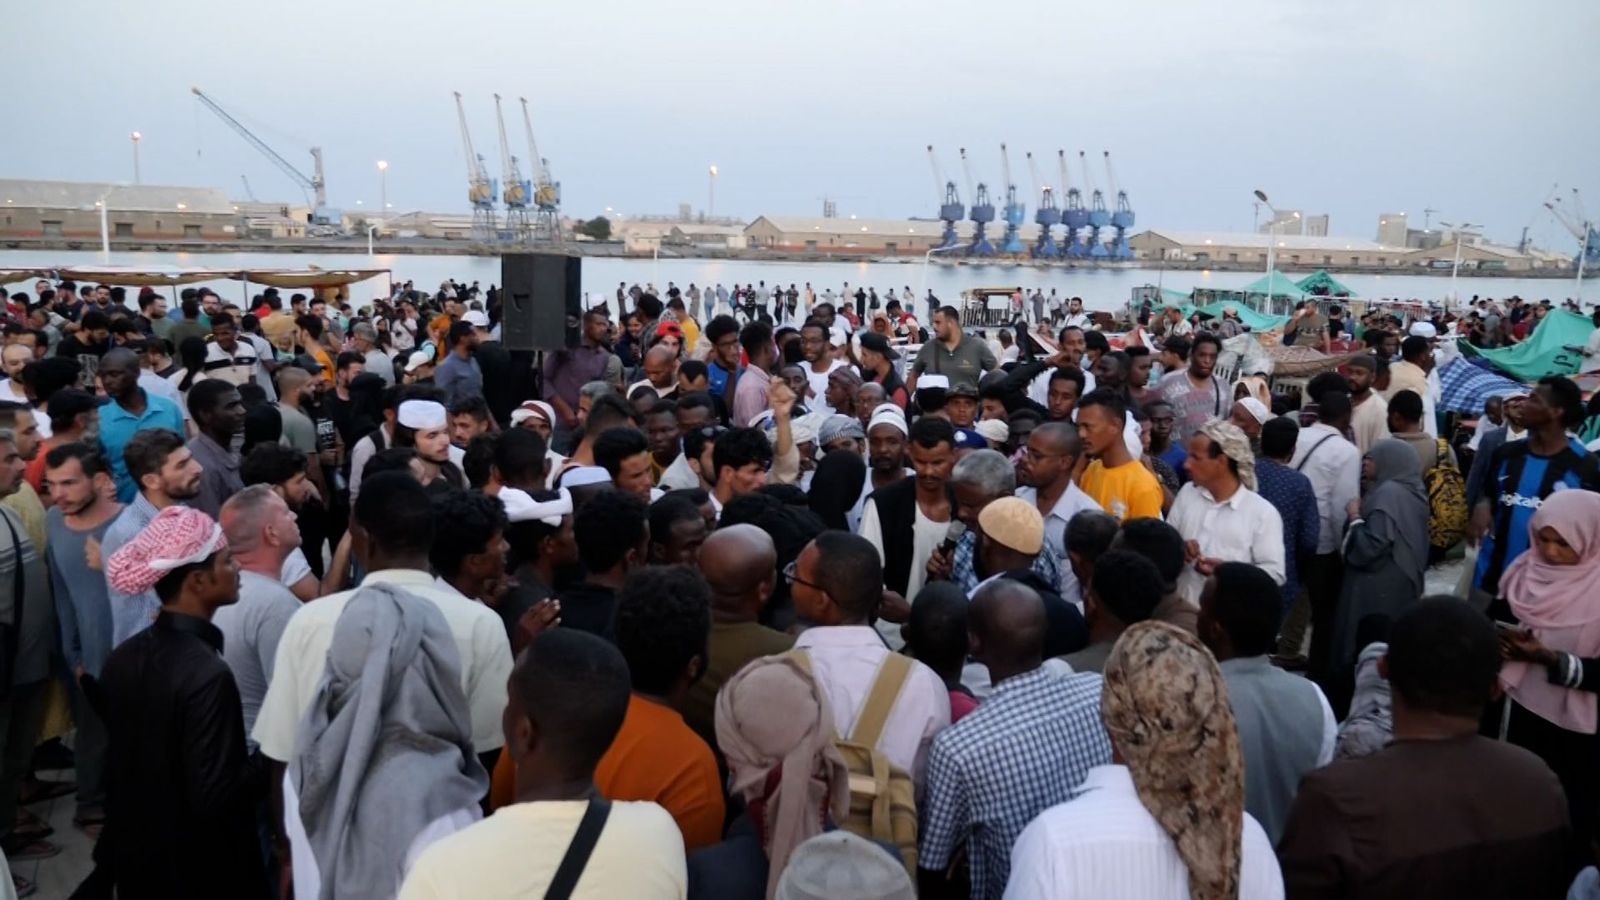 'Death will come to you anywhere' – mayhem at Port Sudan as some return home and others flee civil war